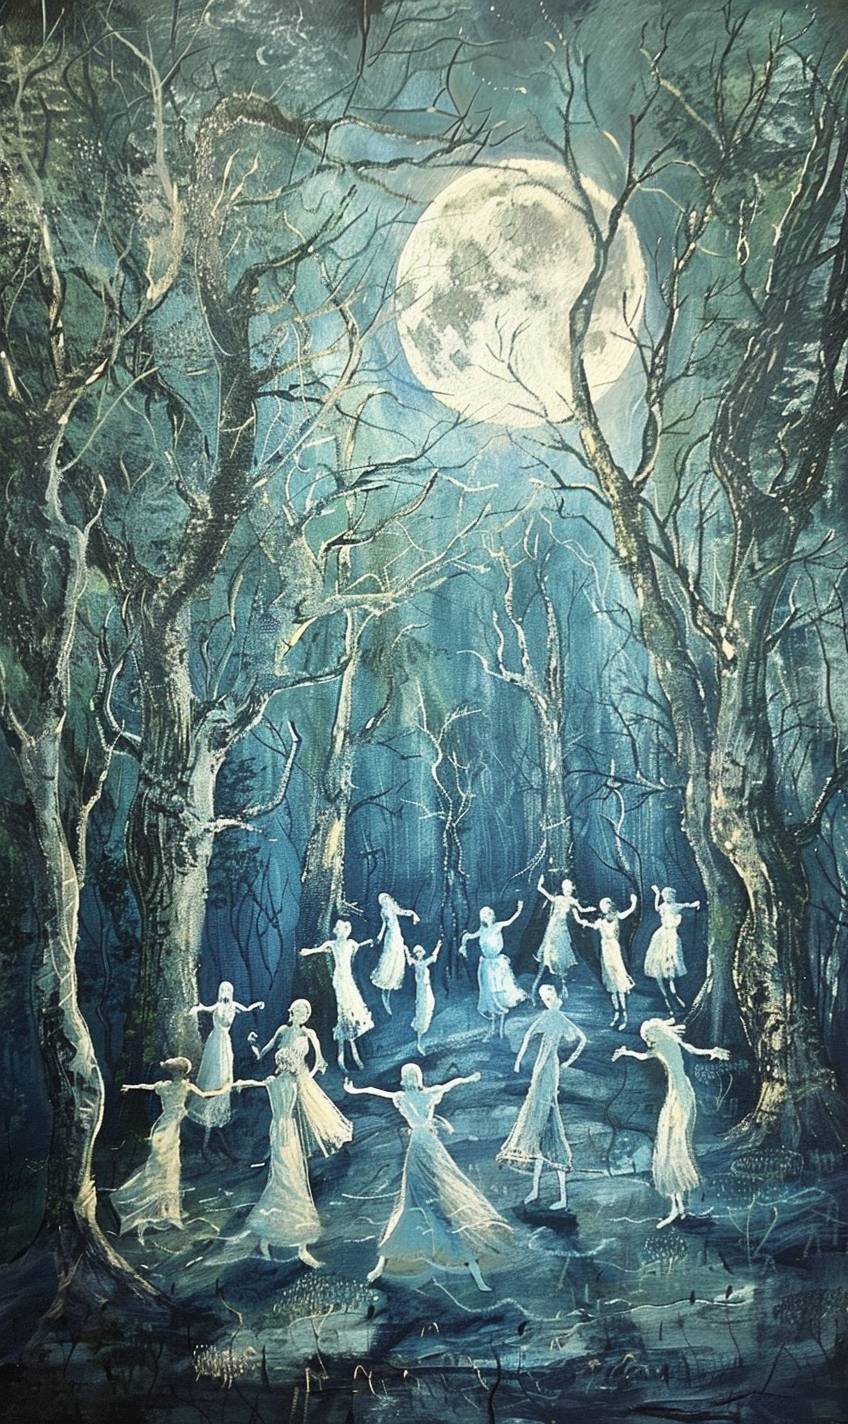 In style of Eric Carle, Ethereal beings dancing in a moonlit clearing